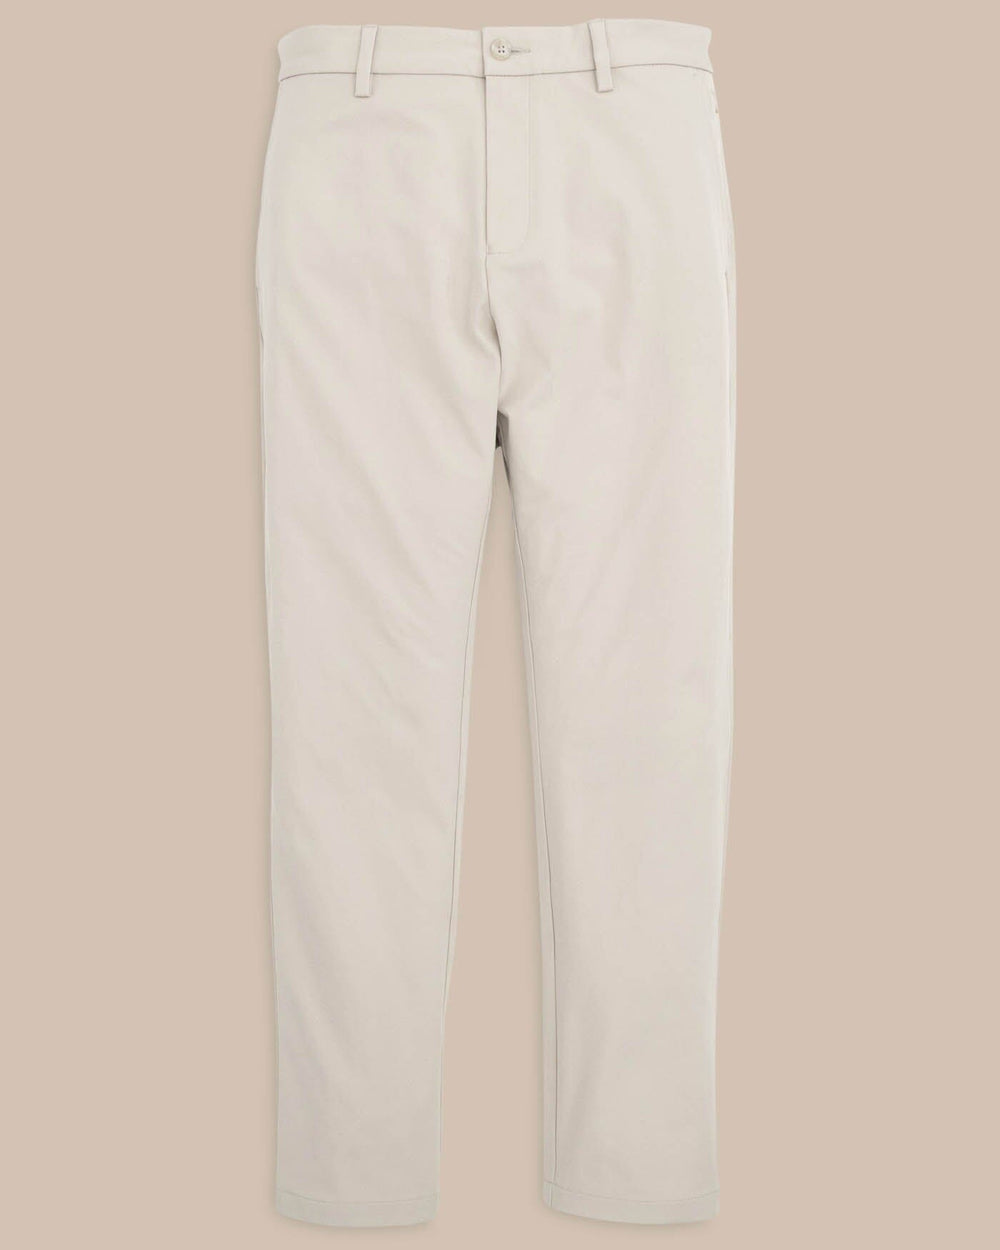 The flat front view of the Men's Jack Performance Pant by Southern Tide - Putty